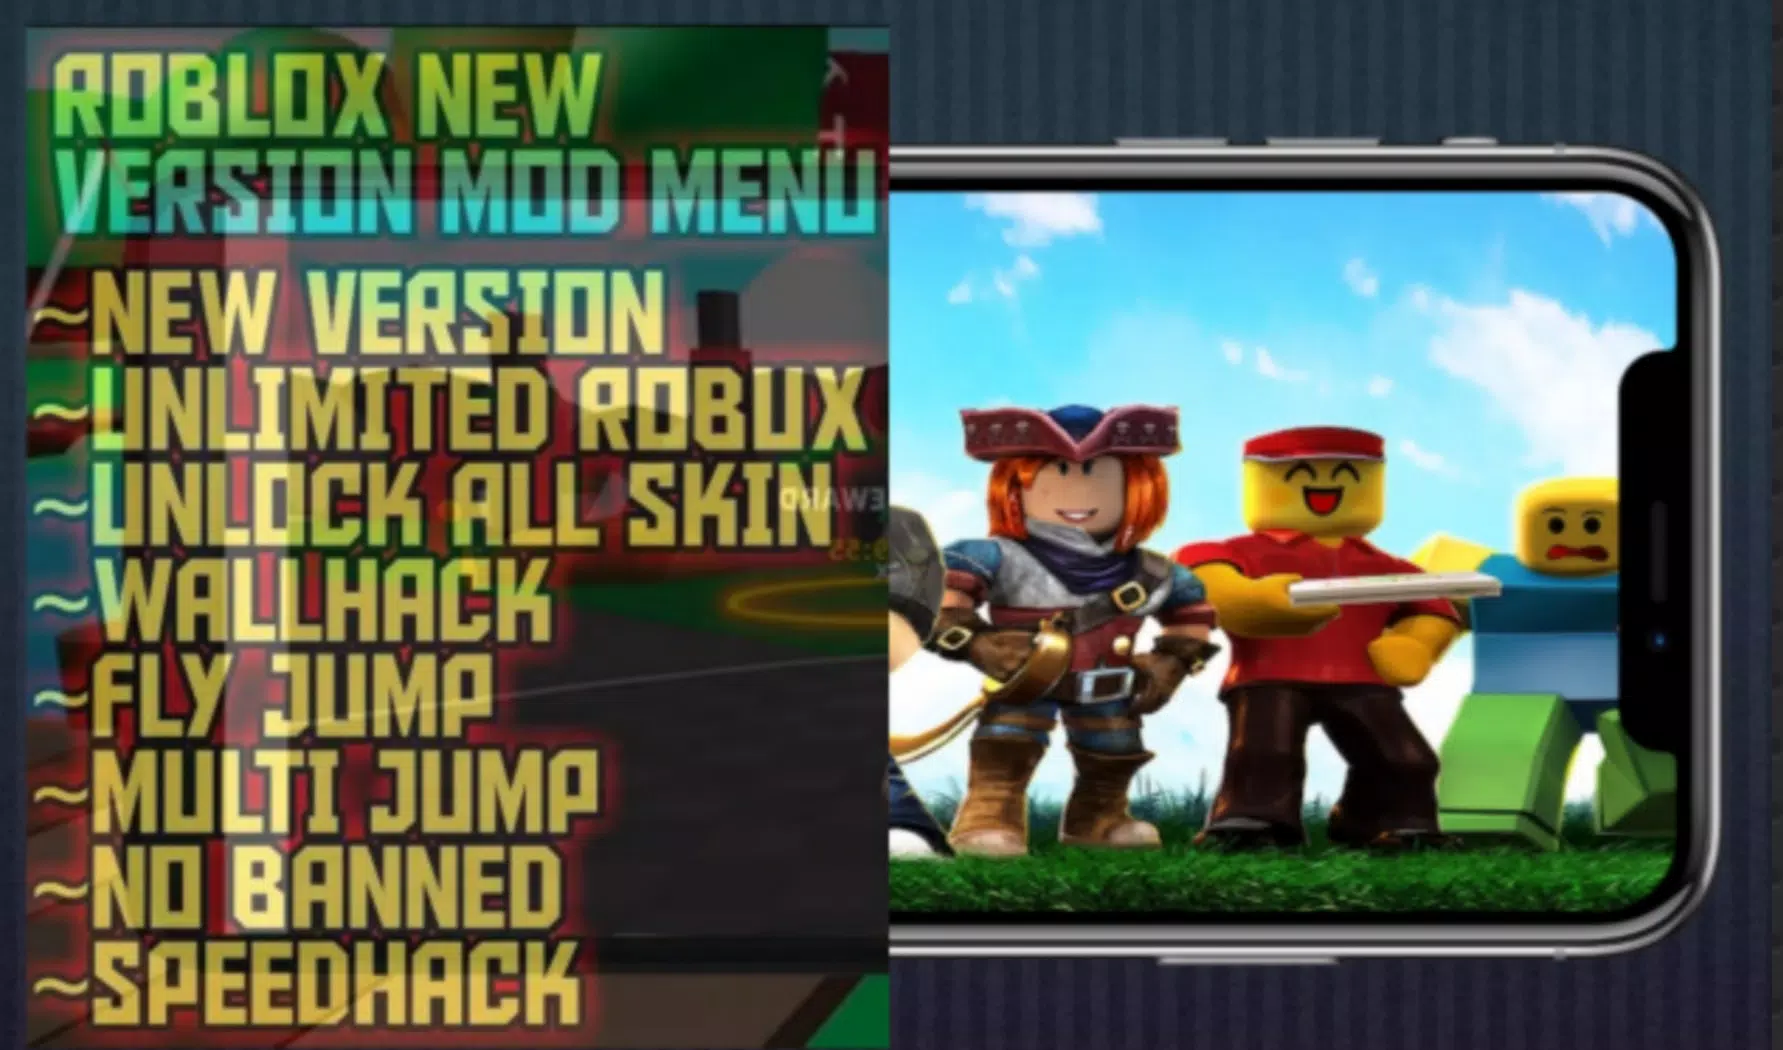 Roblox Mod Menu, Unlimited Robux, Fly, Speed Hack